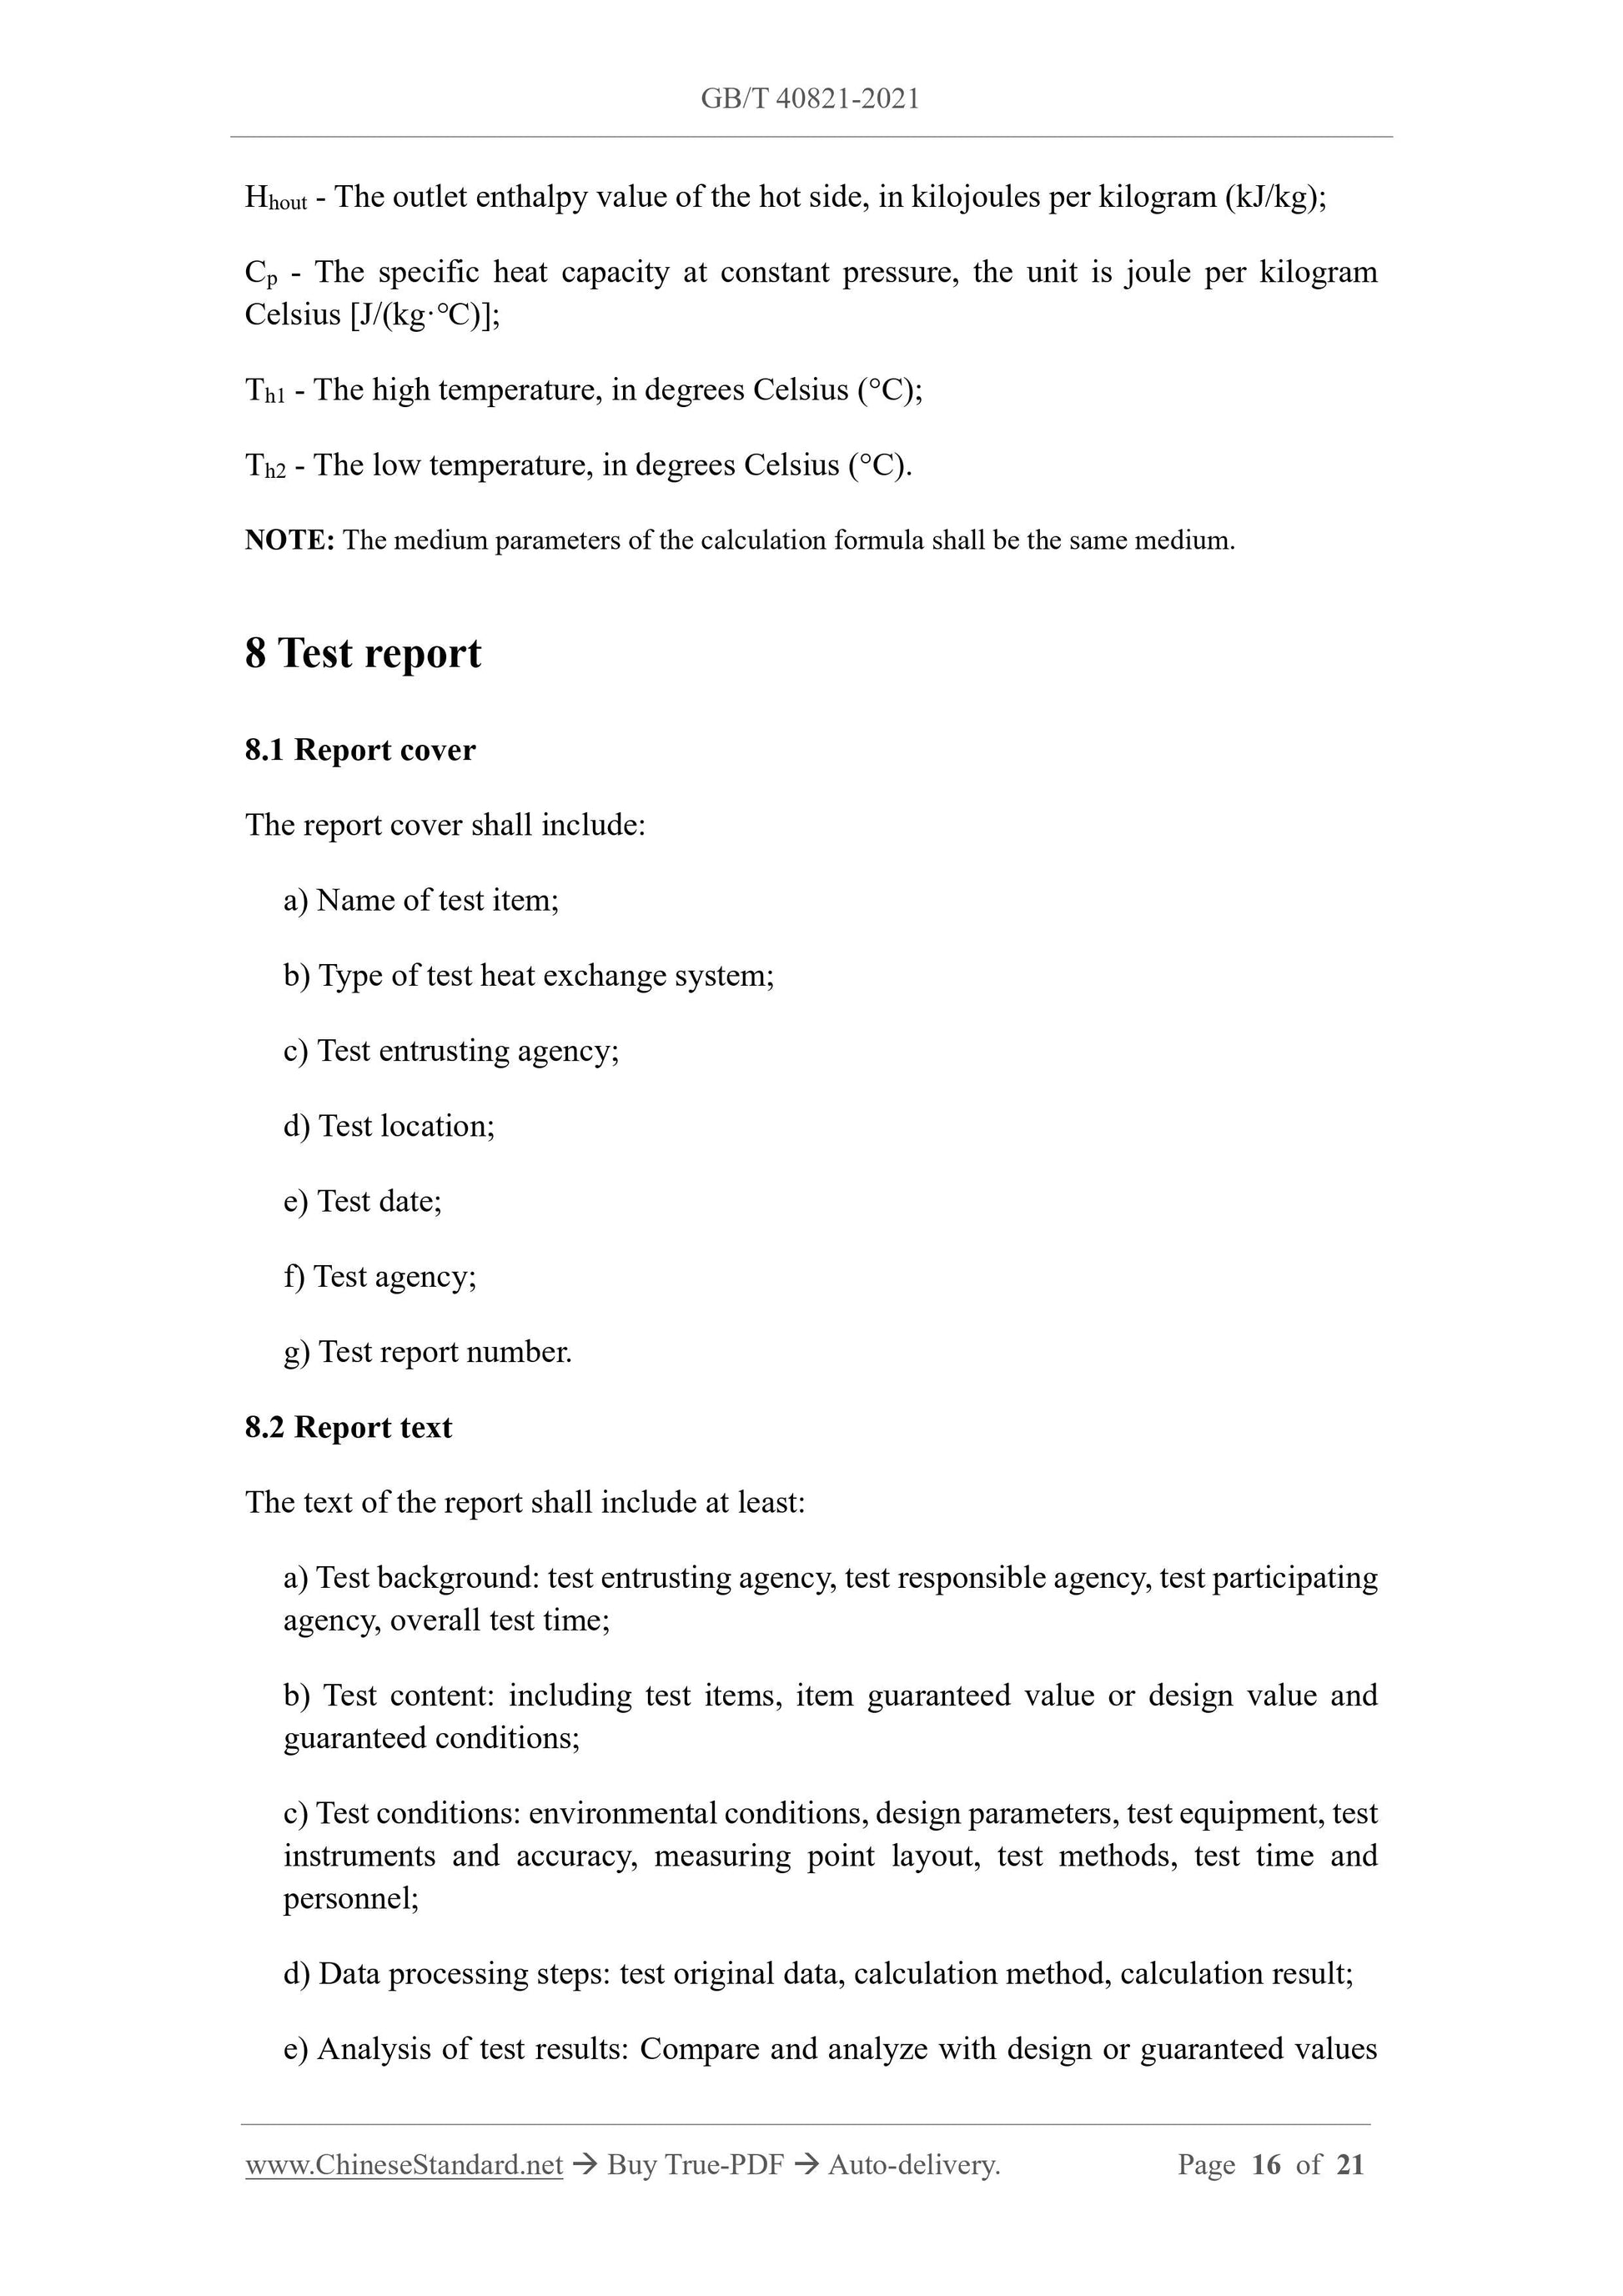 GB/T 40821-2021 Page 8